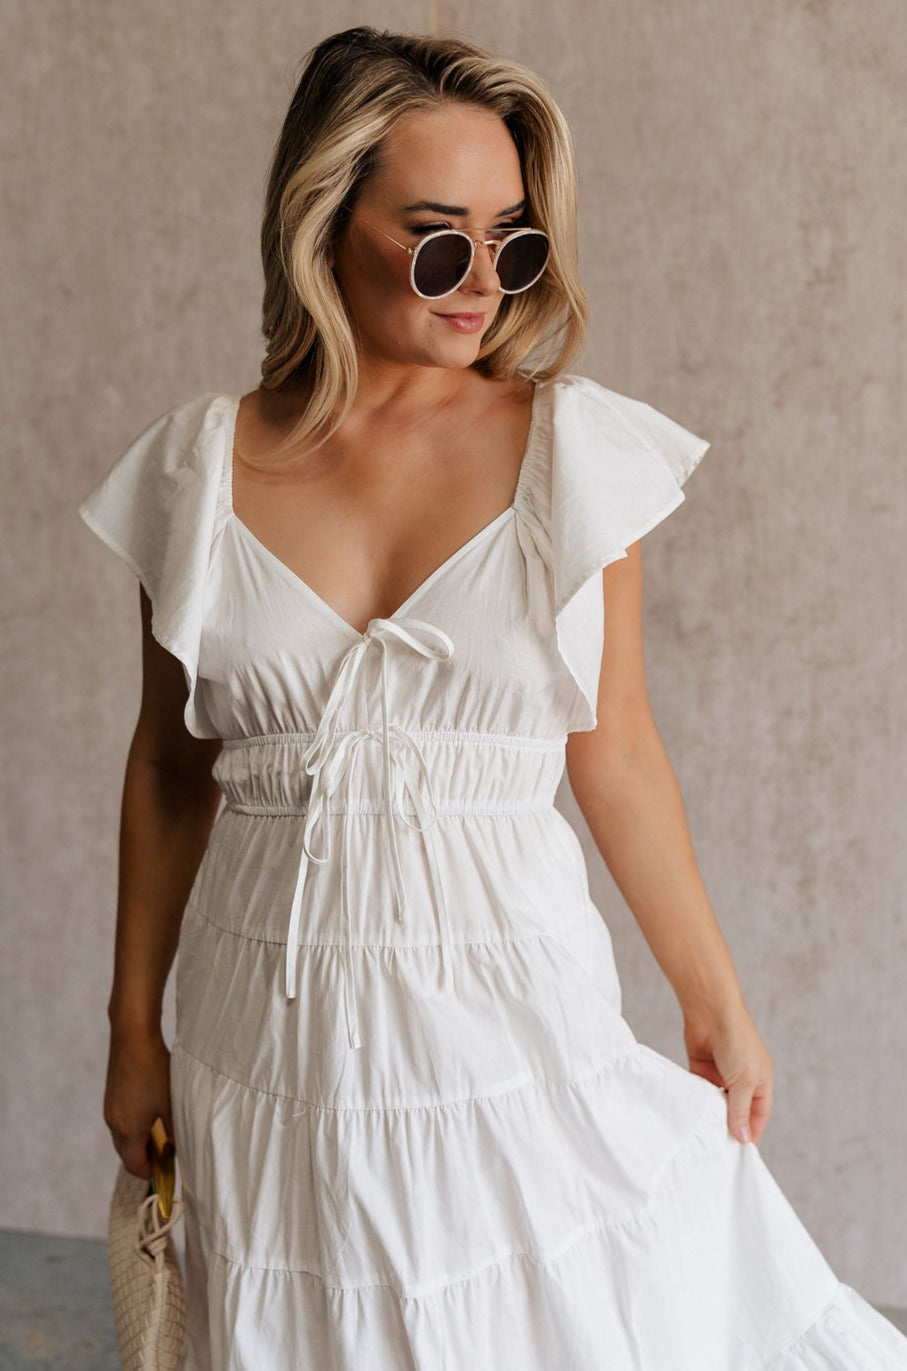 Front view of female model wearing the Gianna Ruffle Short Sleeve Tiered Maxi Dress in White which features Lightweight Fabric, Tiered Body, Midi Length, Pockets on each side, V-Neckline with a Tie Detail and Ruffle Short Sleeves. the dress is available in pink, aqua blue and white.